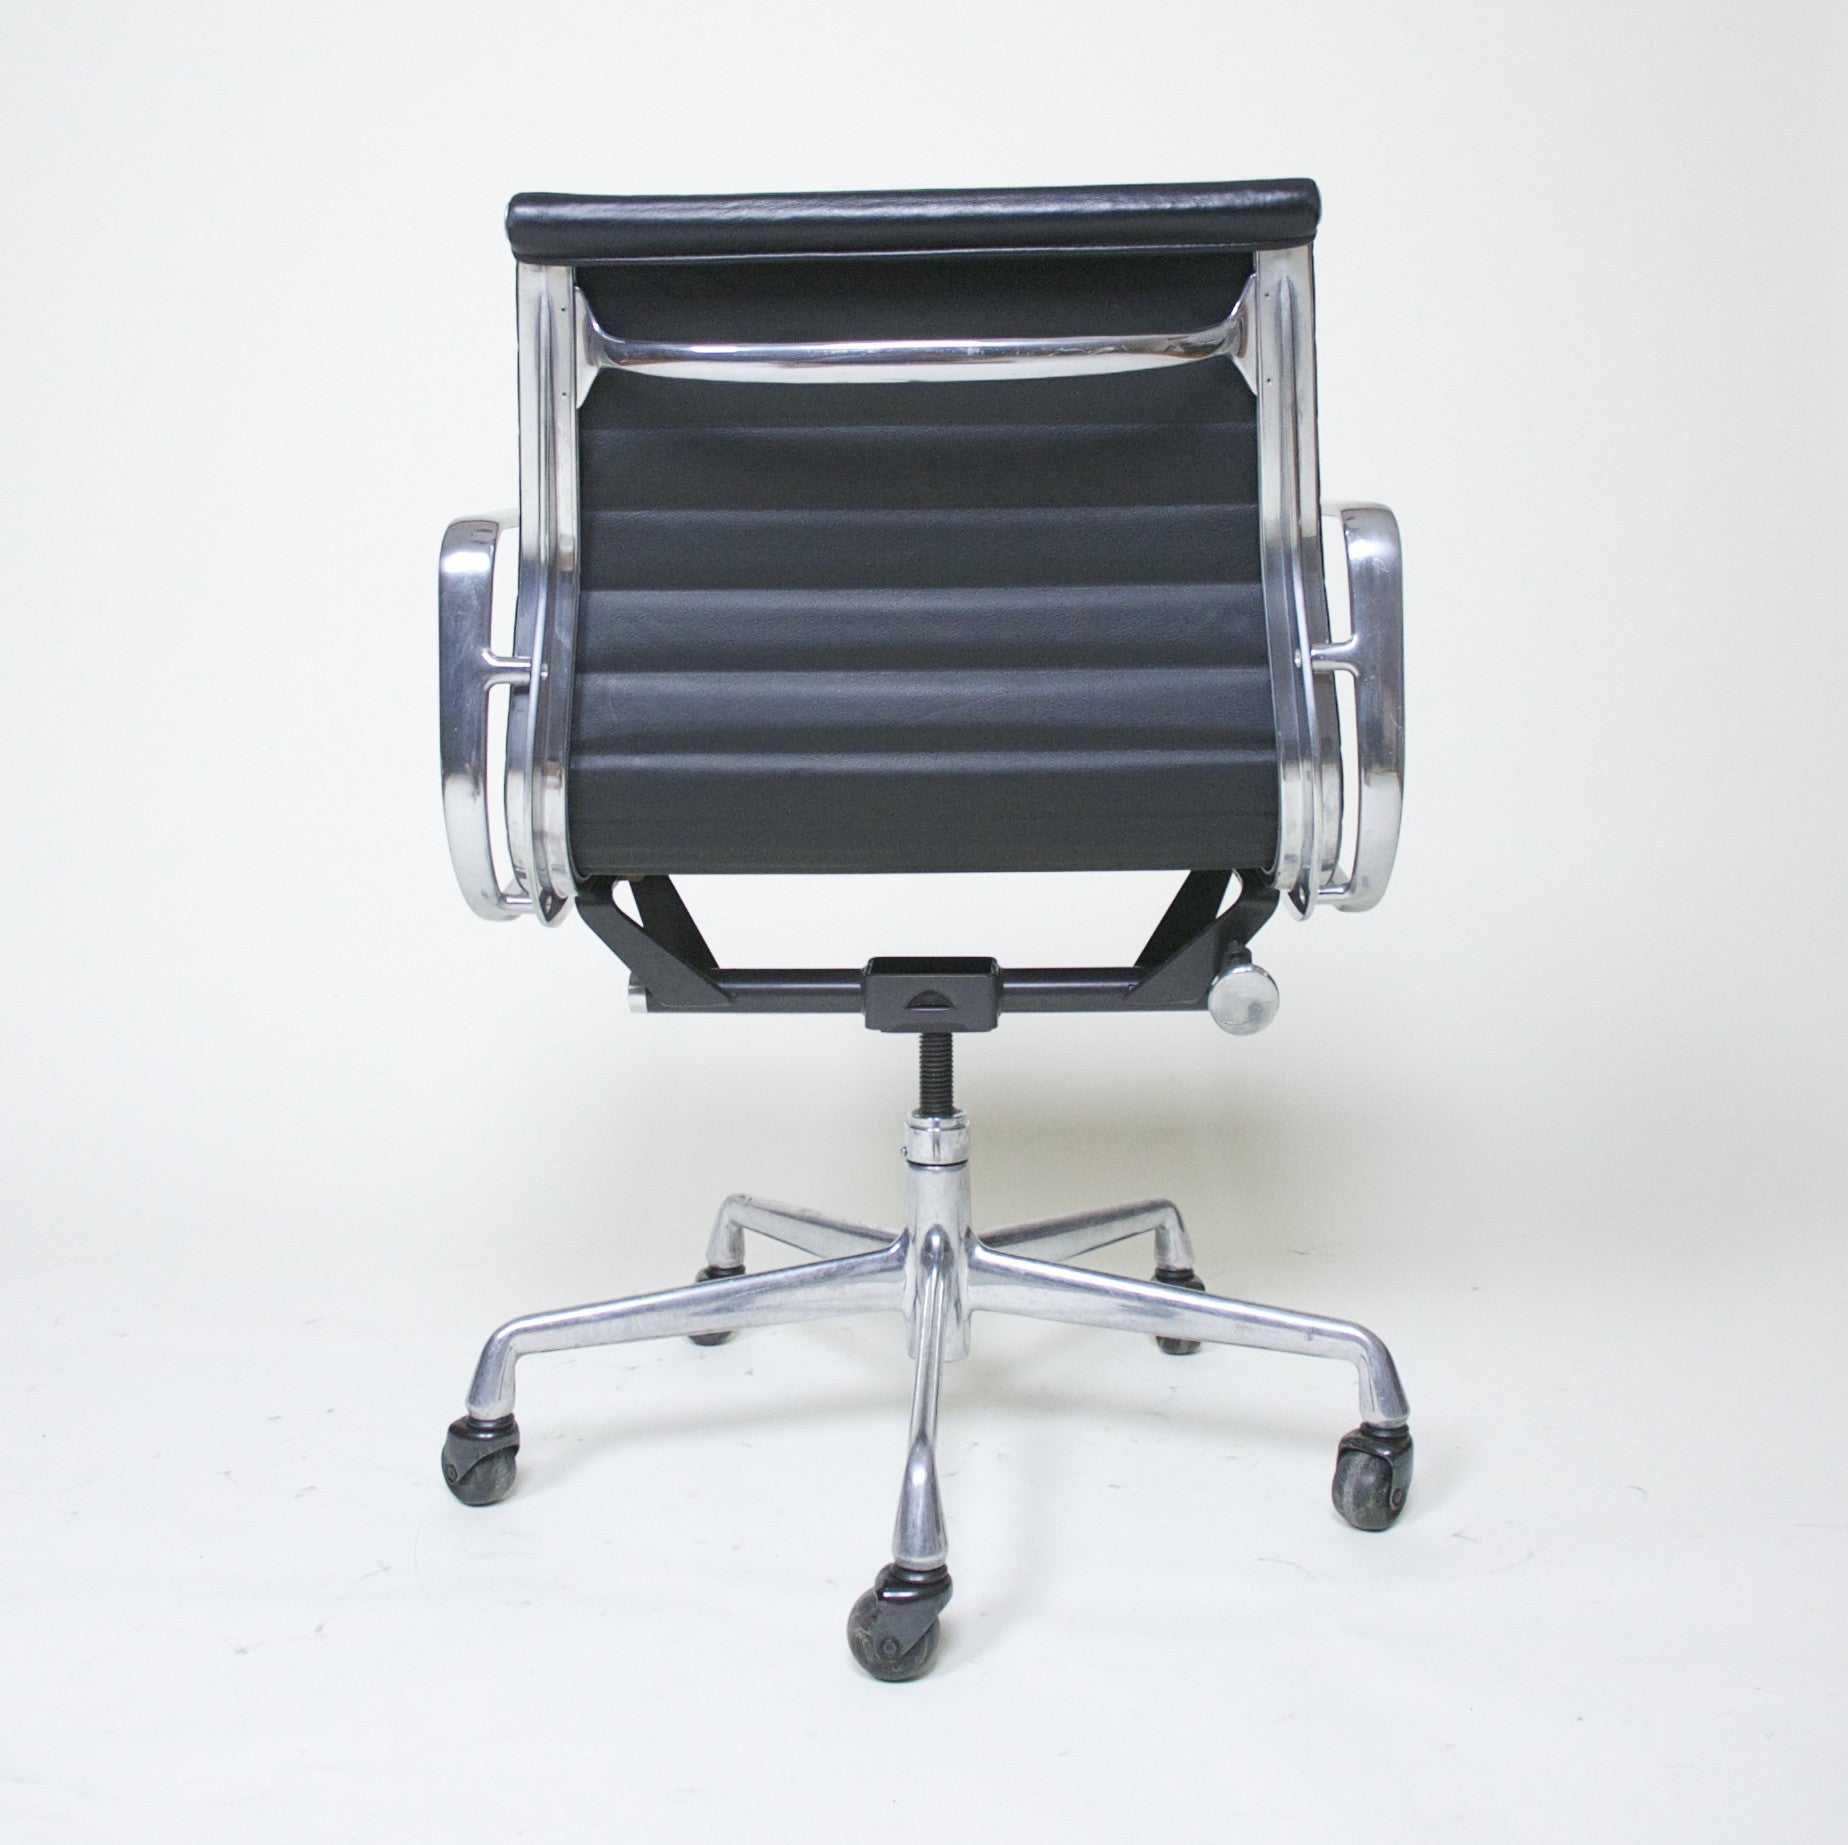 SOLD Eames Herman Miller Aluminum Group Executive Desk Chair Black Leather 2 Available